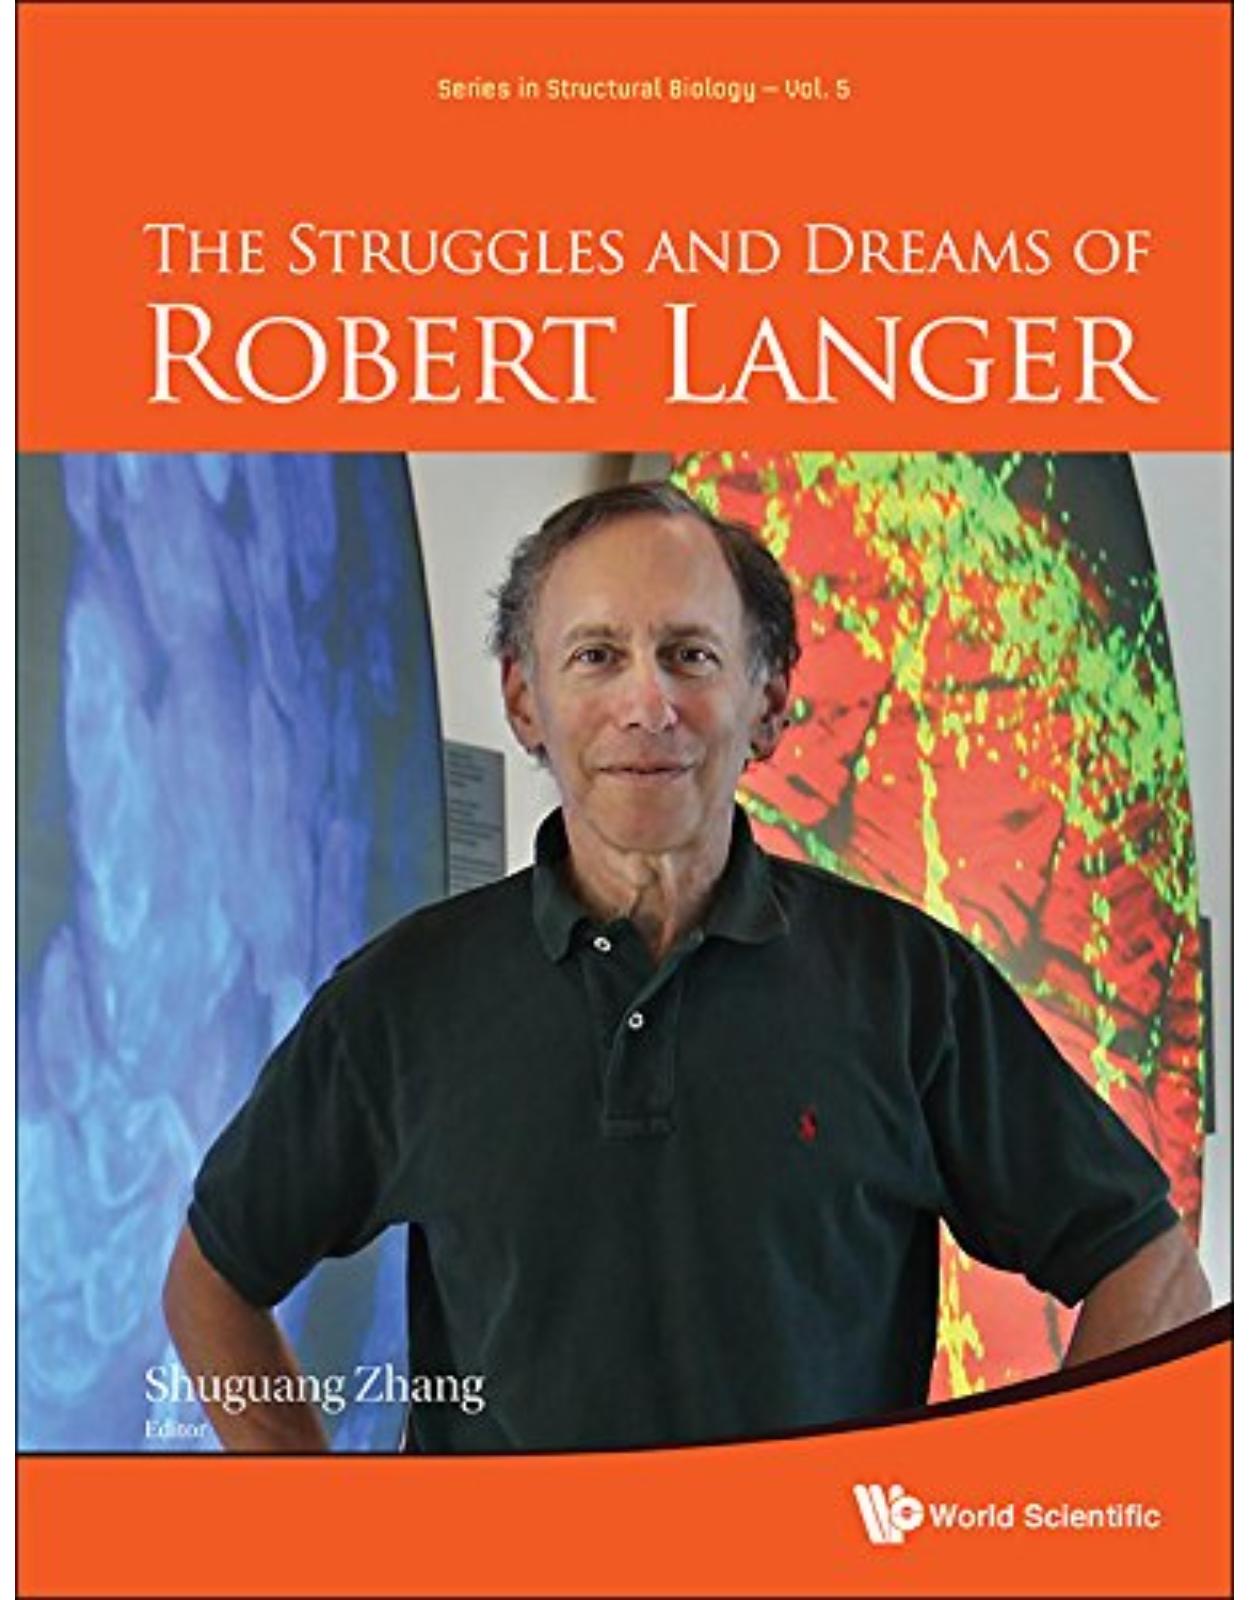 The Struggles and Dreams of Robert Langer (Series in Structural Biology) 